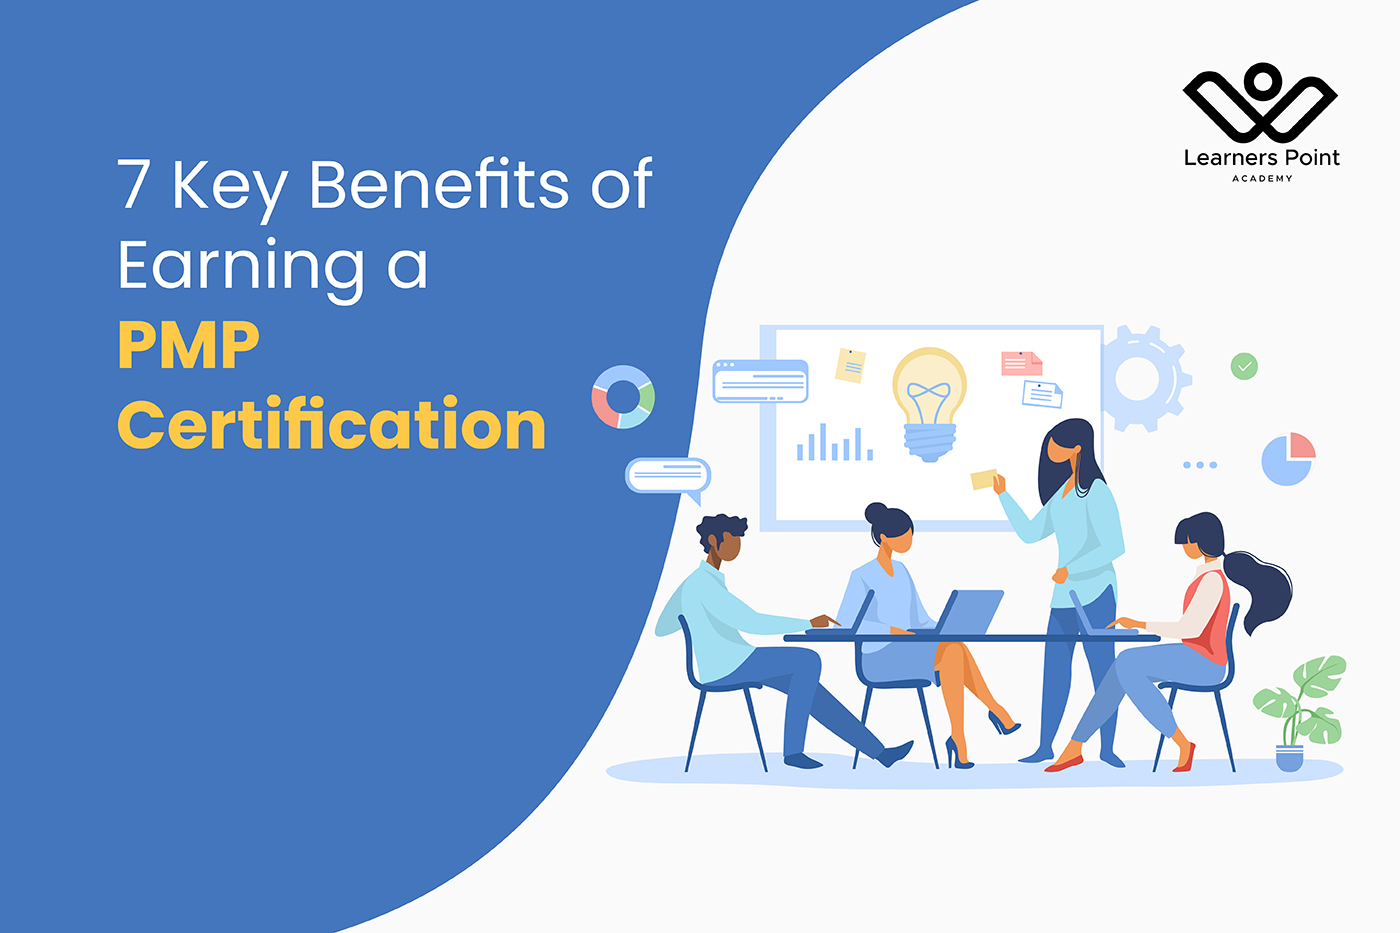 7 Key Benefits of Earning a PMP Certification